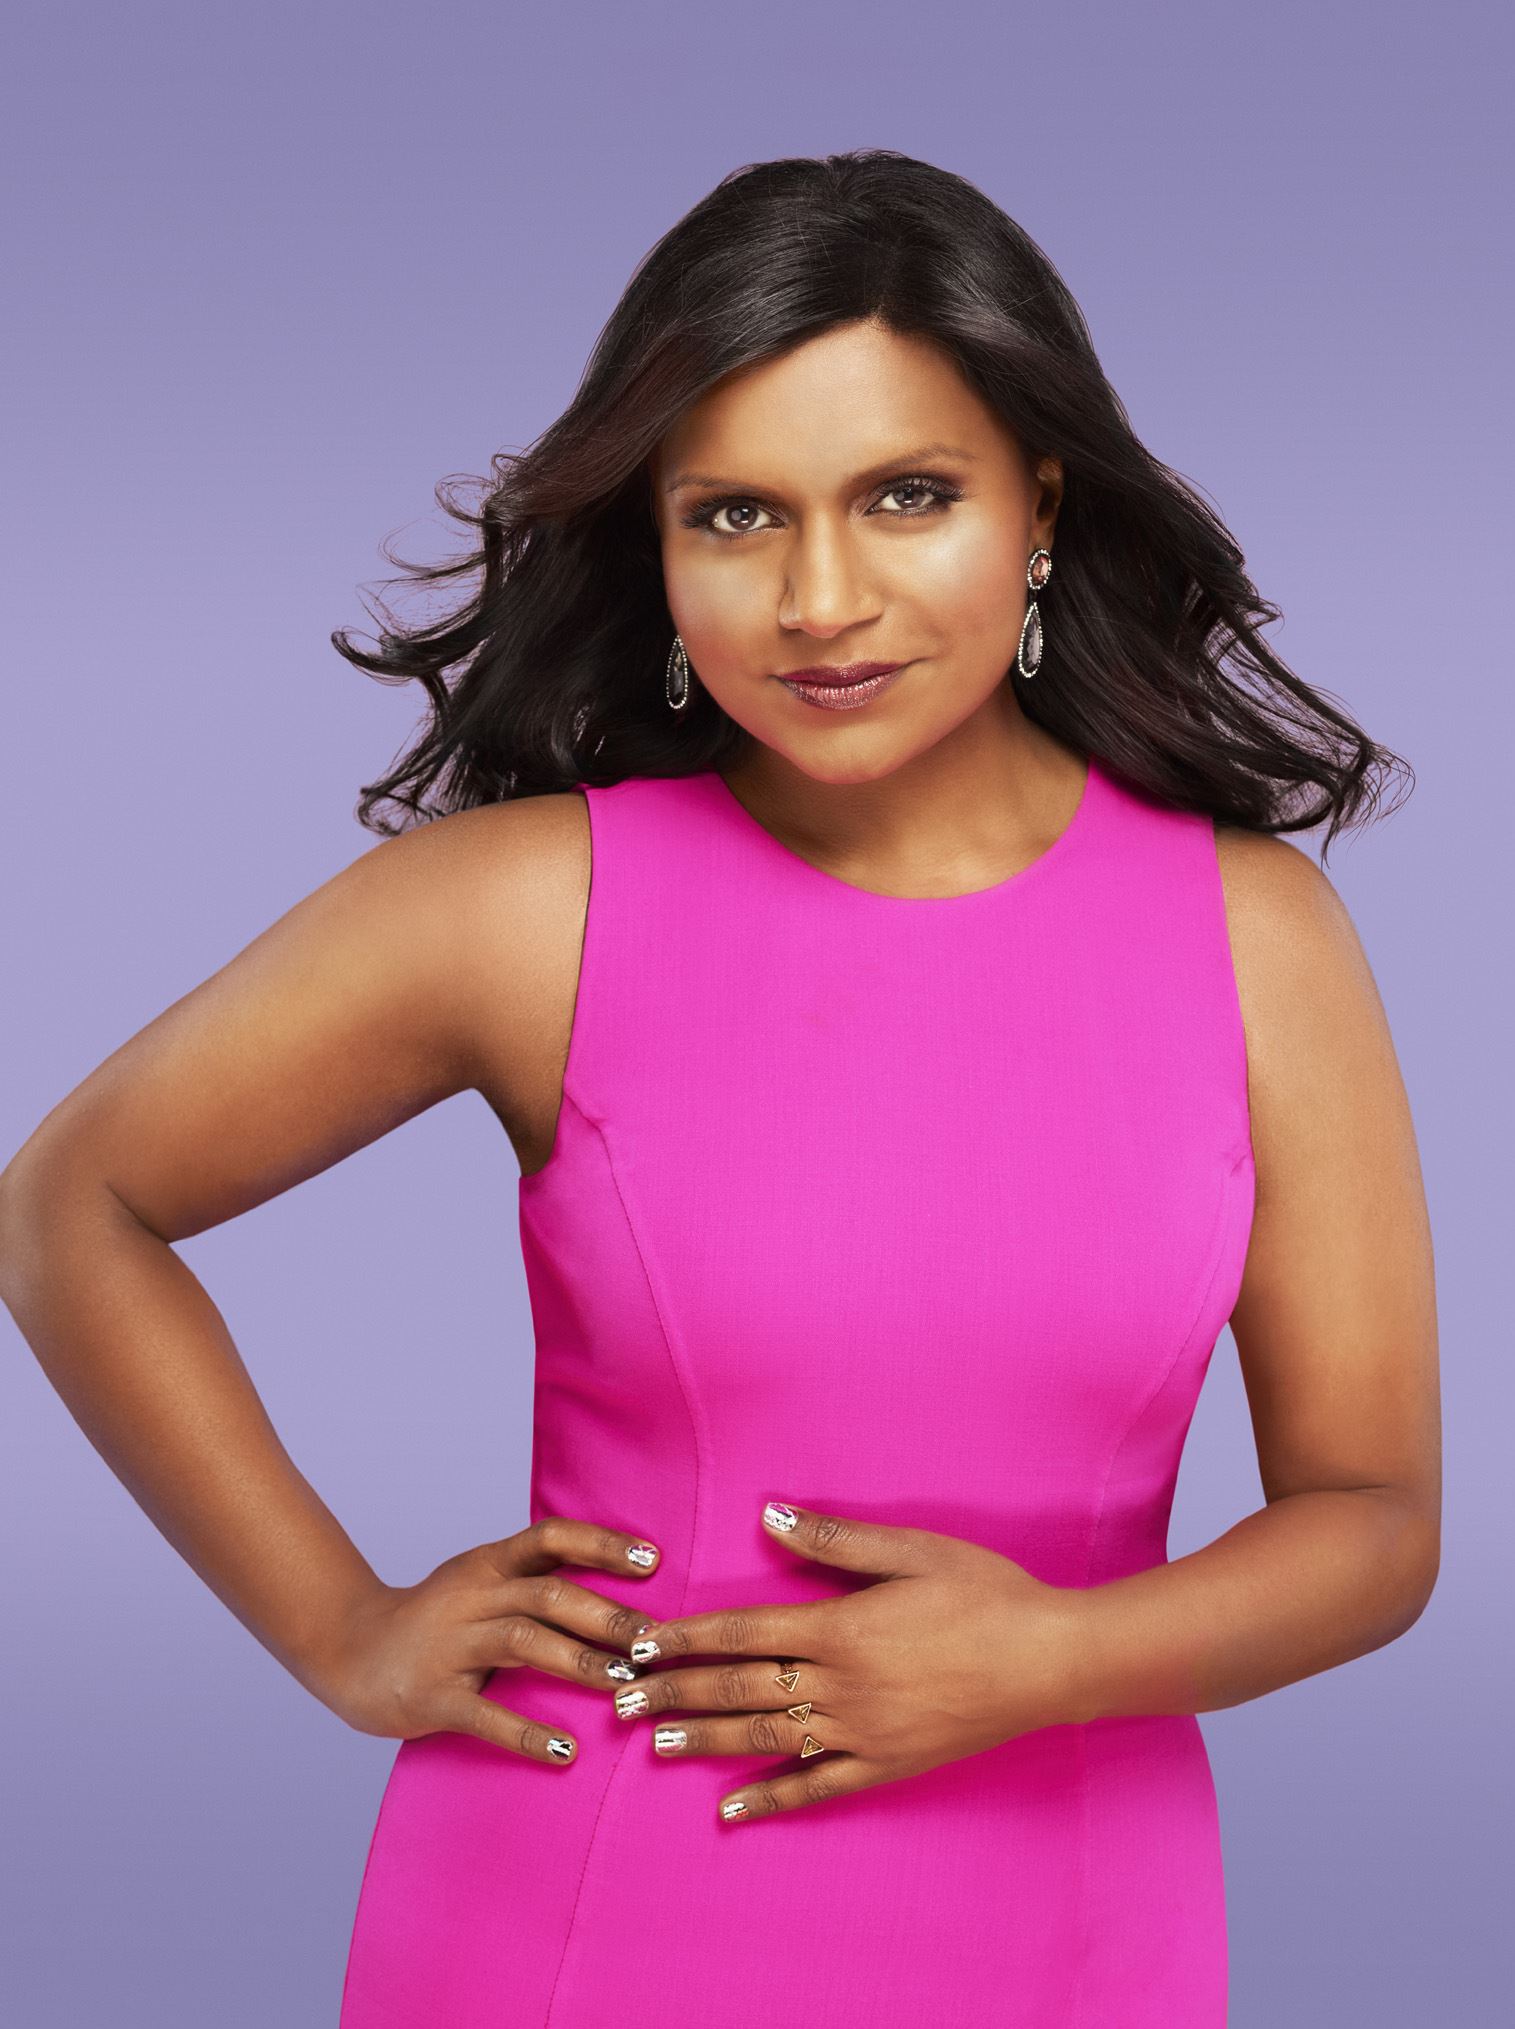 Actress Mindy Kaling Finds It Hard To Make Female Friends In Hollywood.